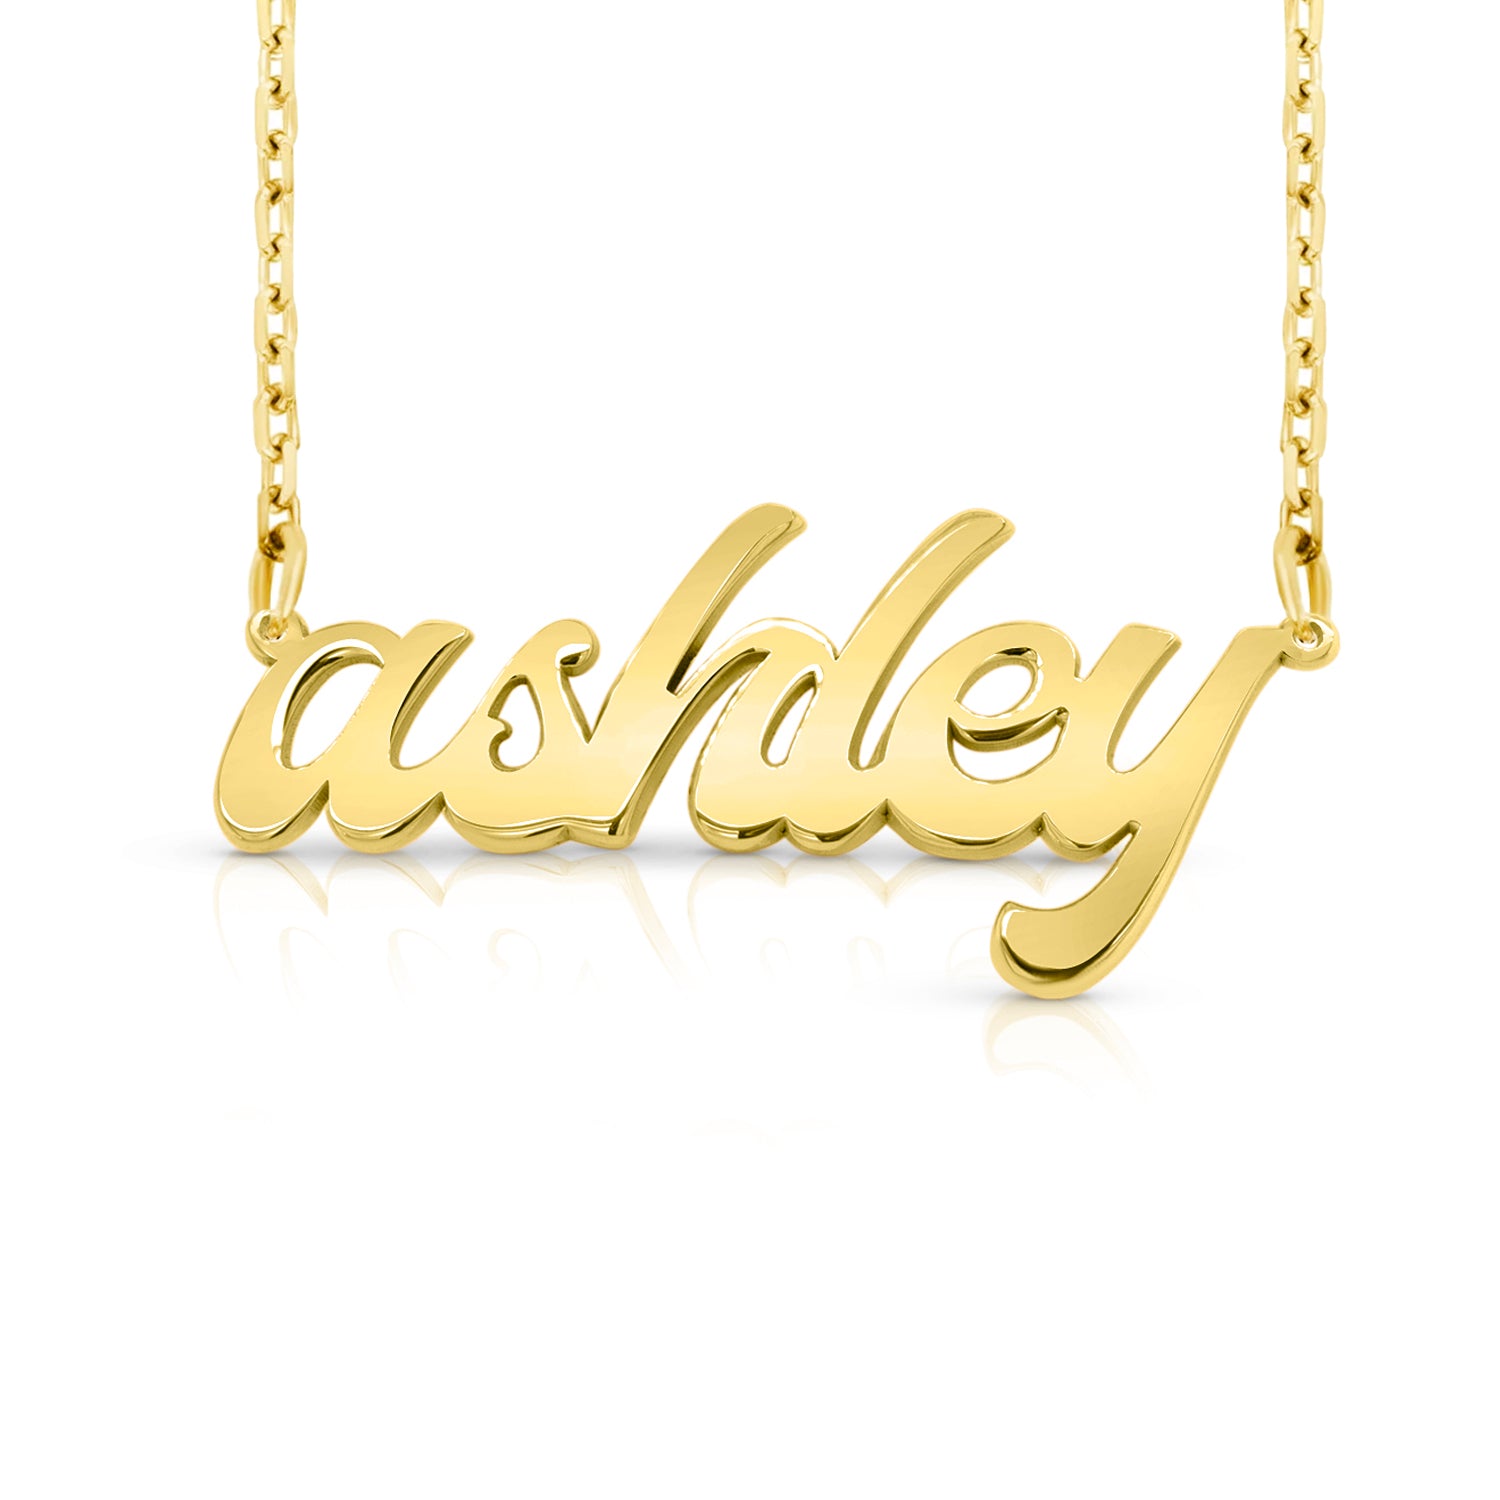 Gold necklace with a custom name pedant on a white background